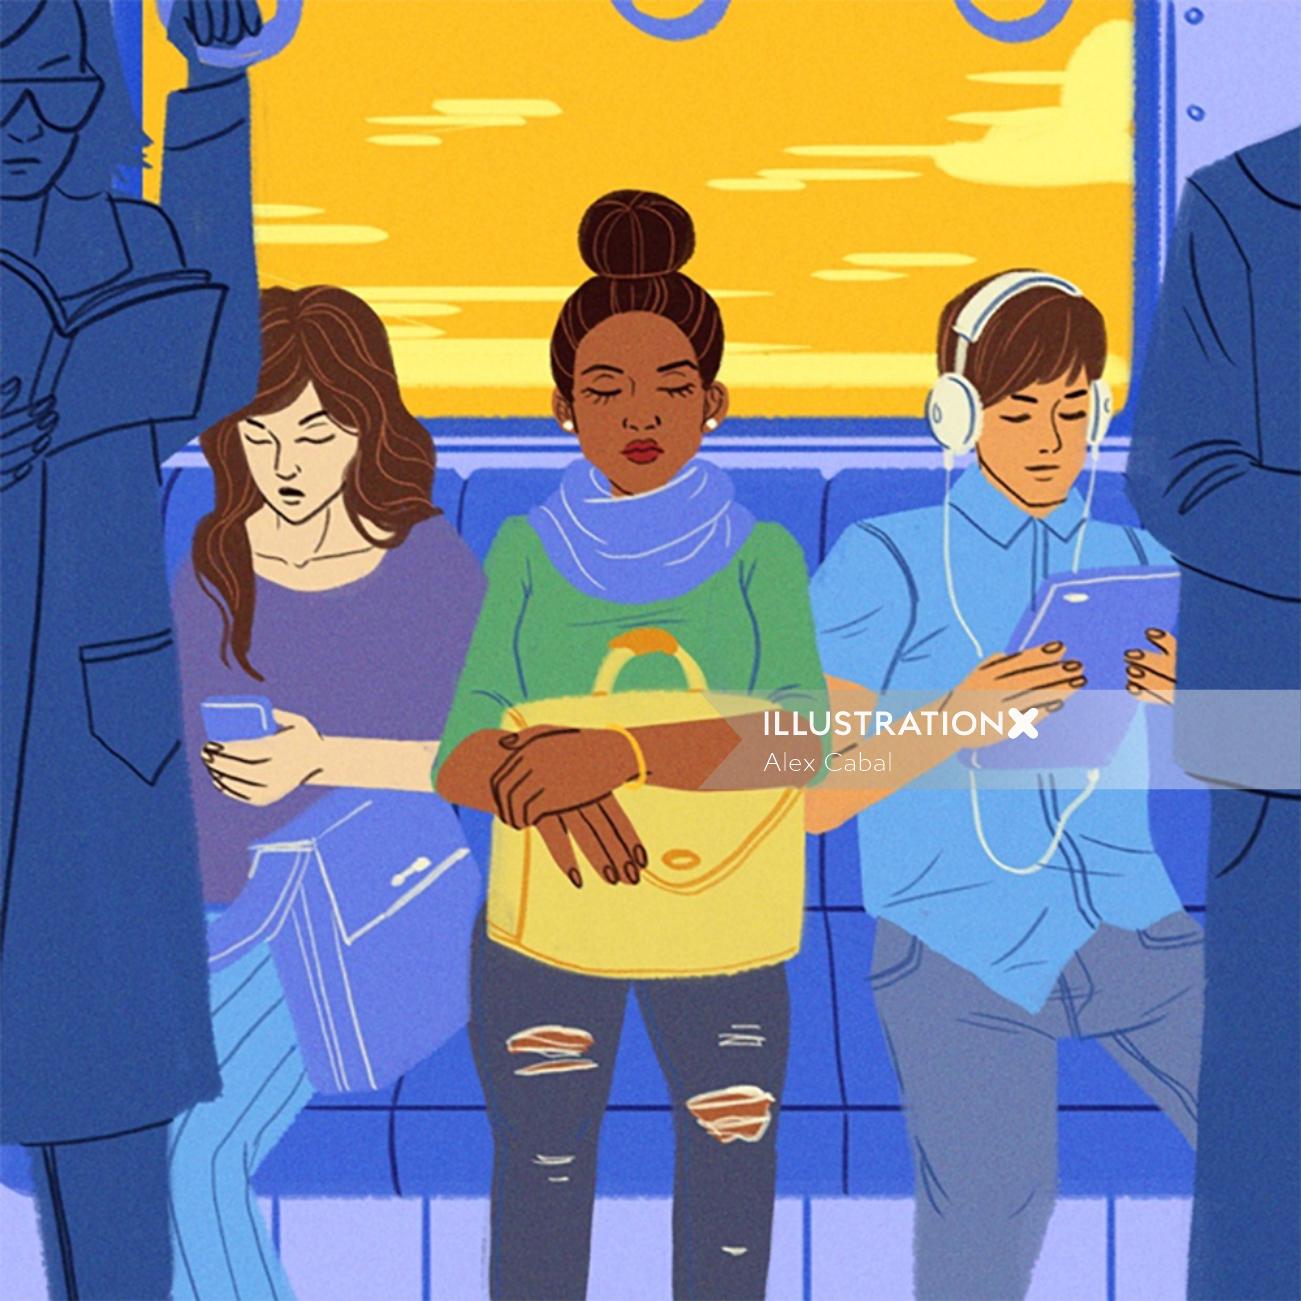 Editorial illustration of people in bus
